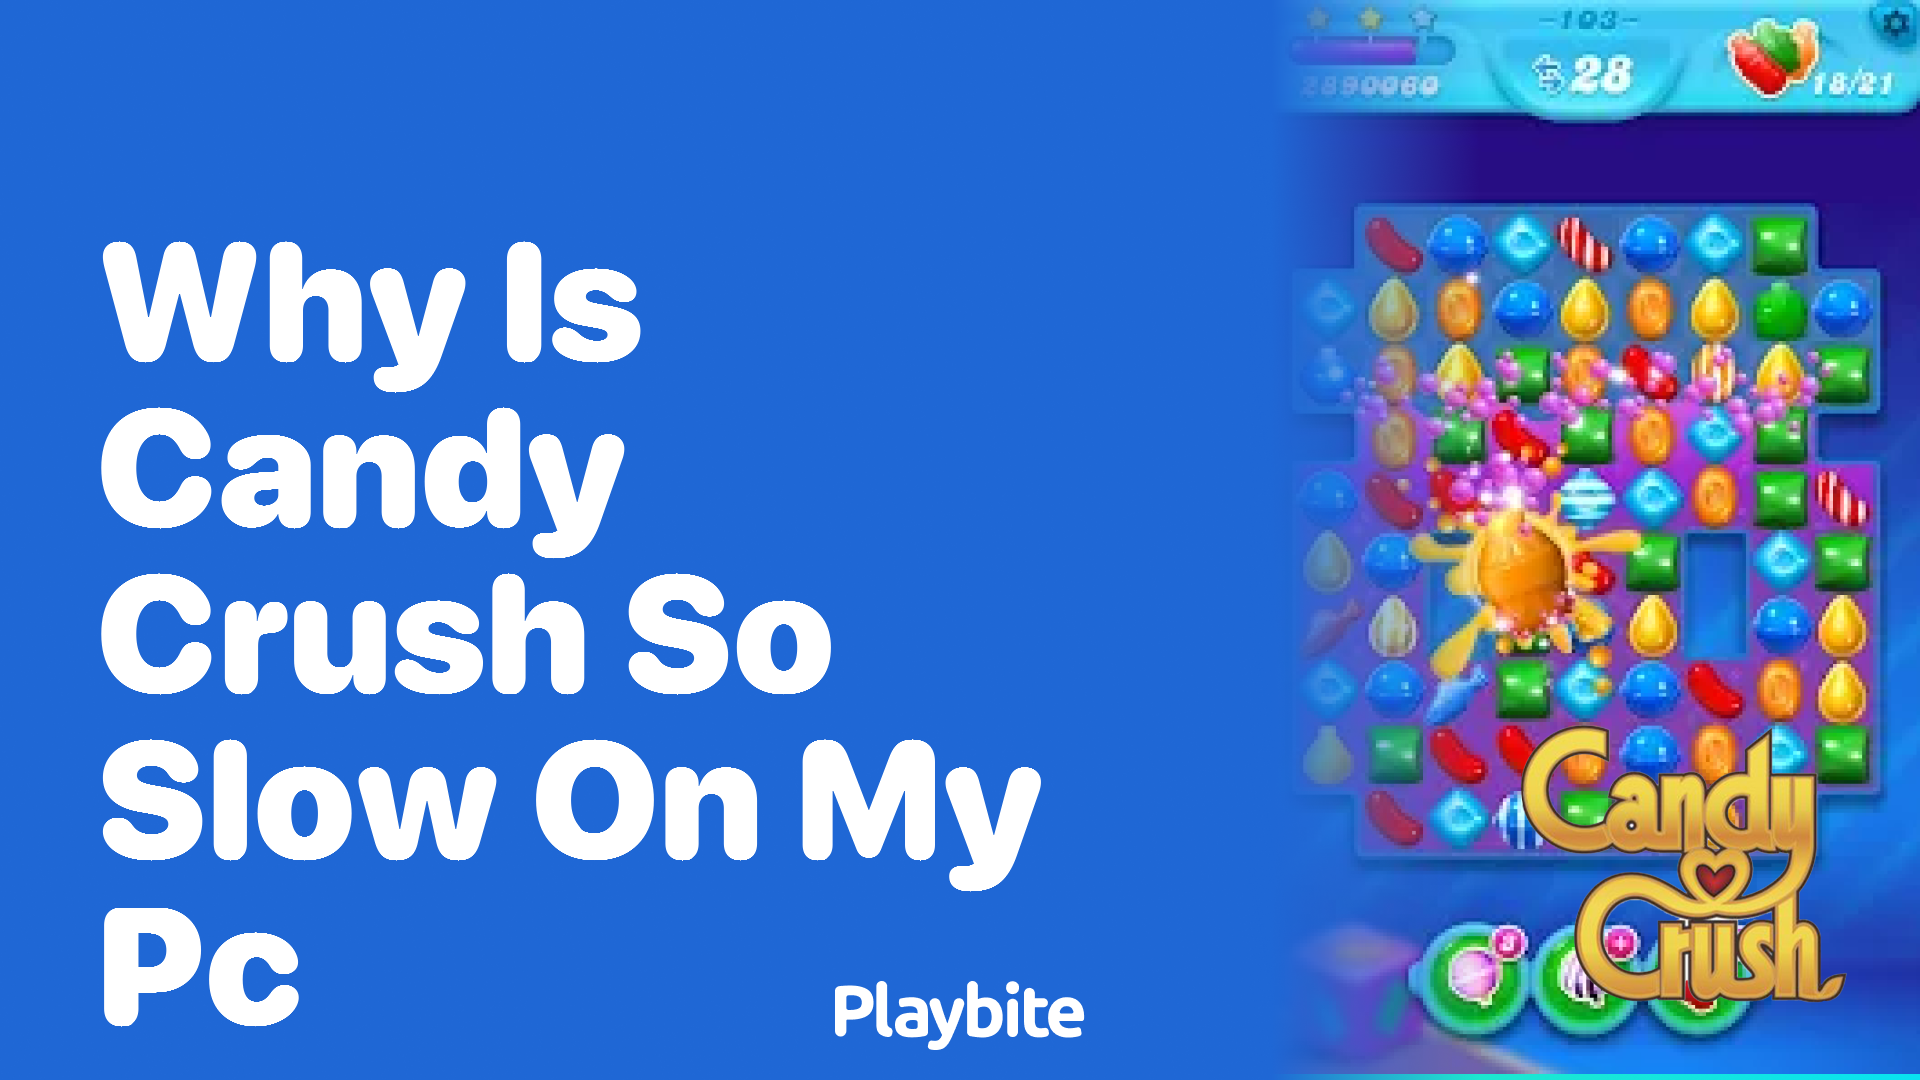 Why Is Candy Crush So Slow on My PC?